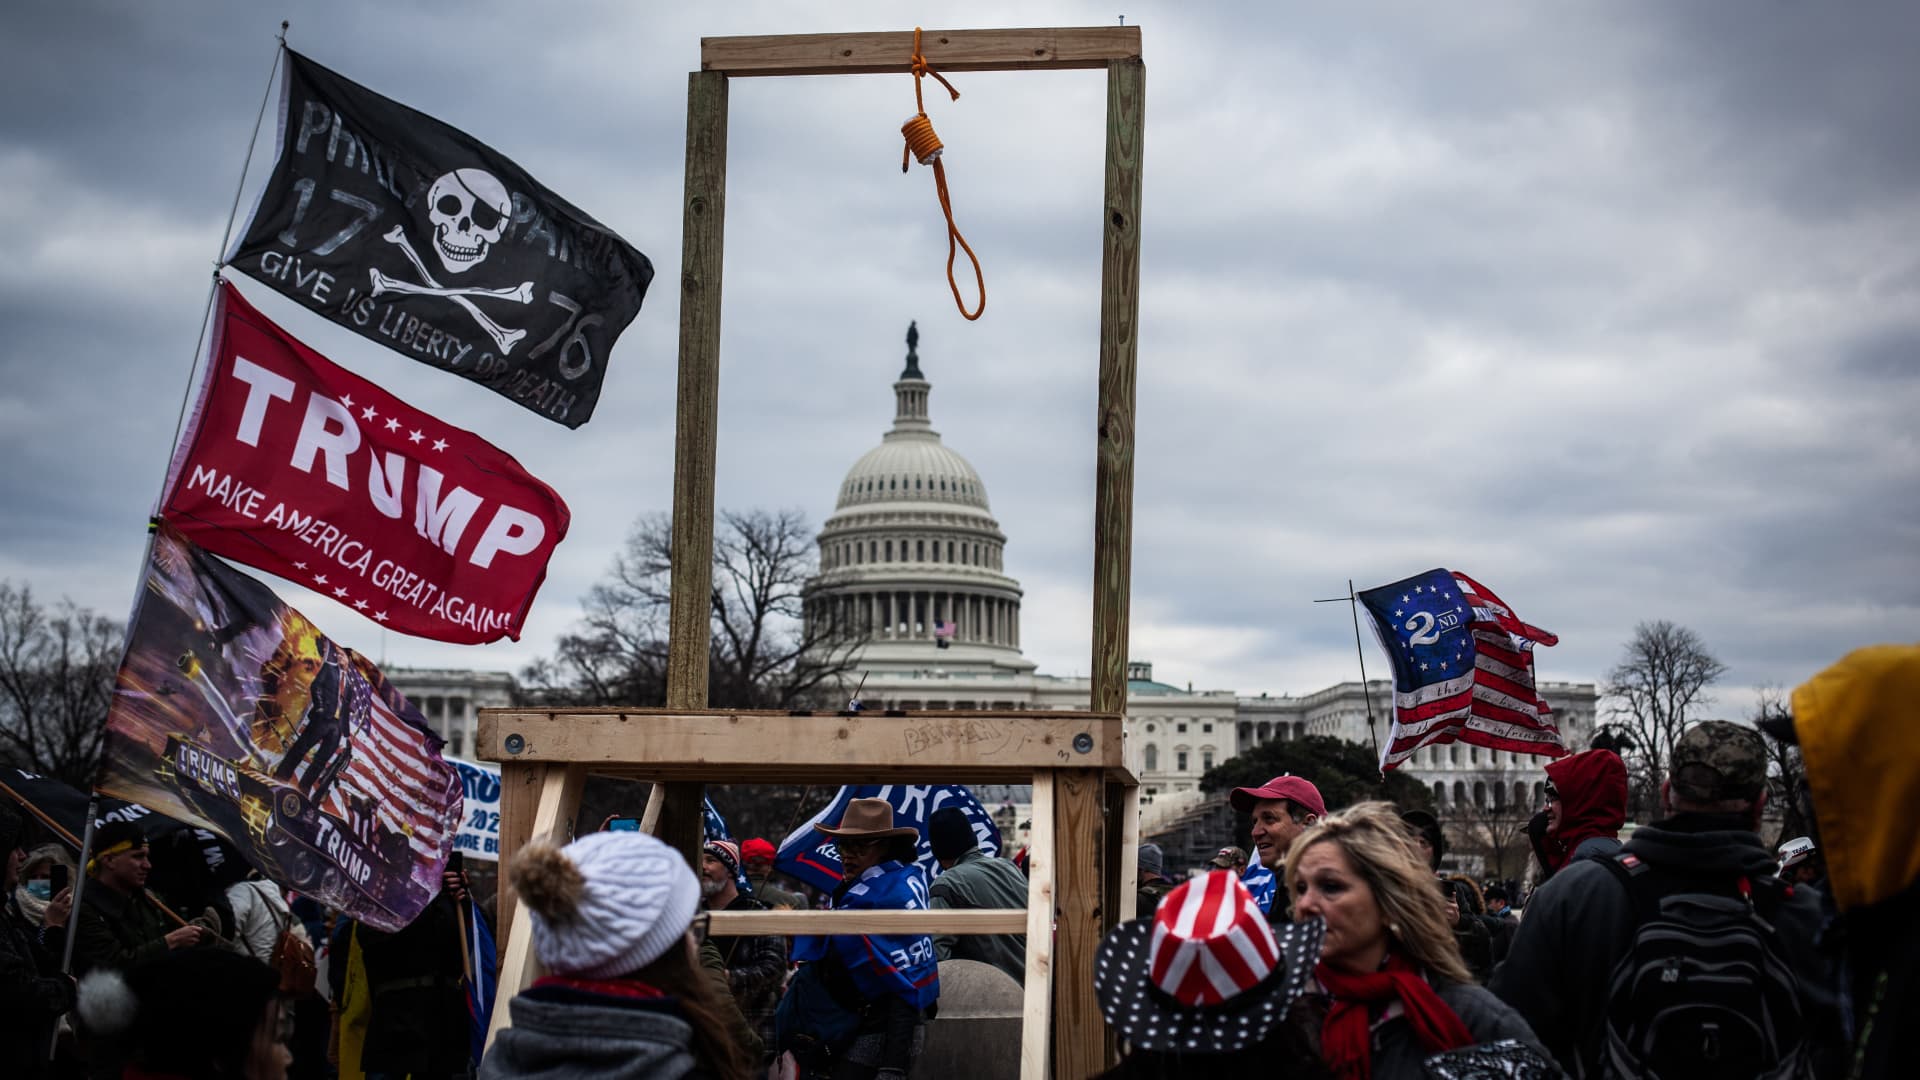 Trump supporters near the U.S Capitol, on January 06, 2021 in Washington, DC.